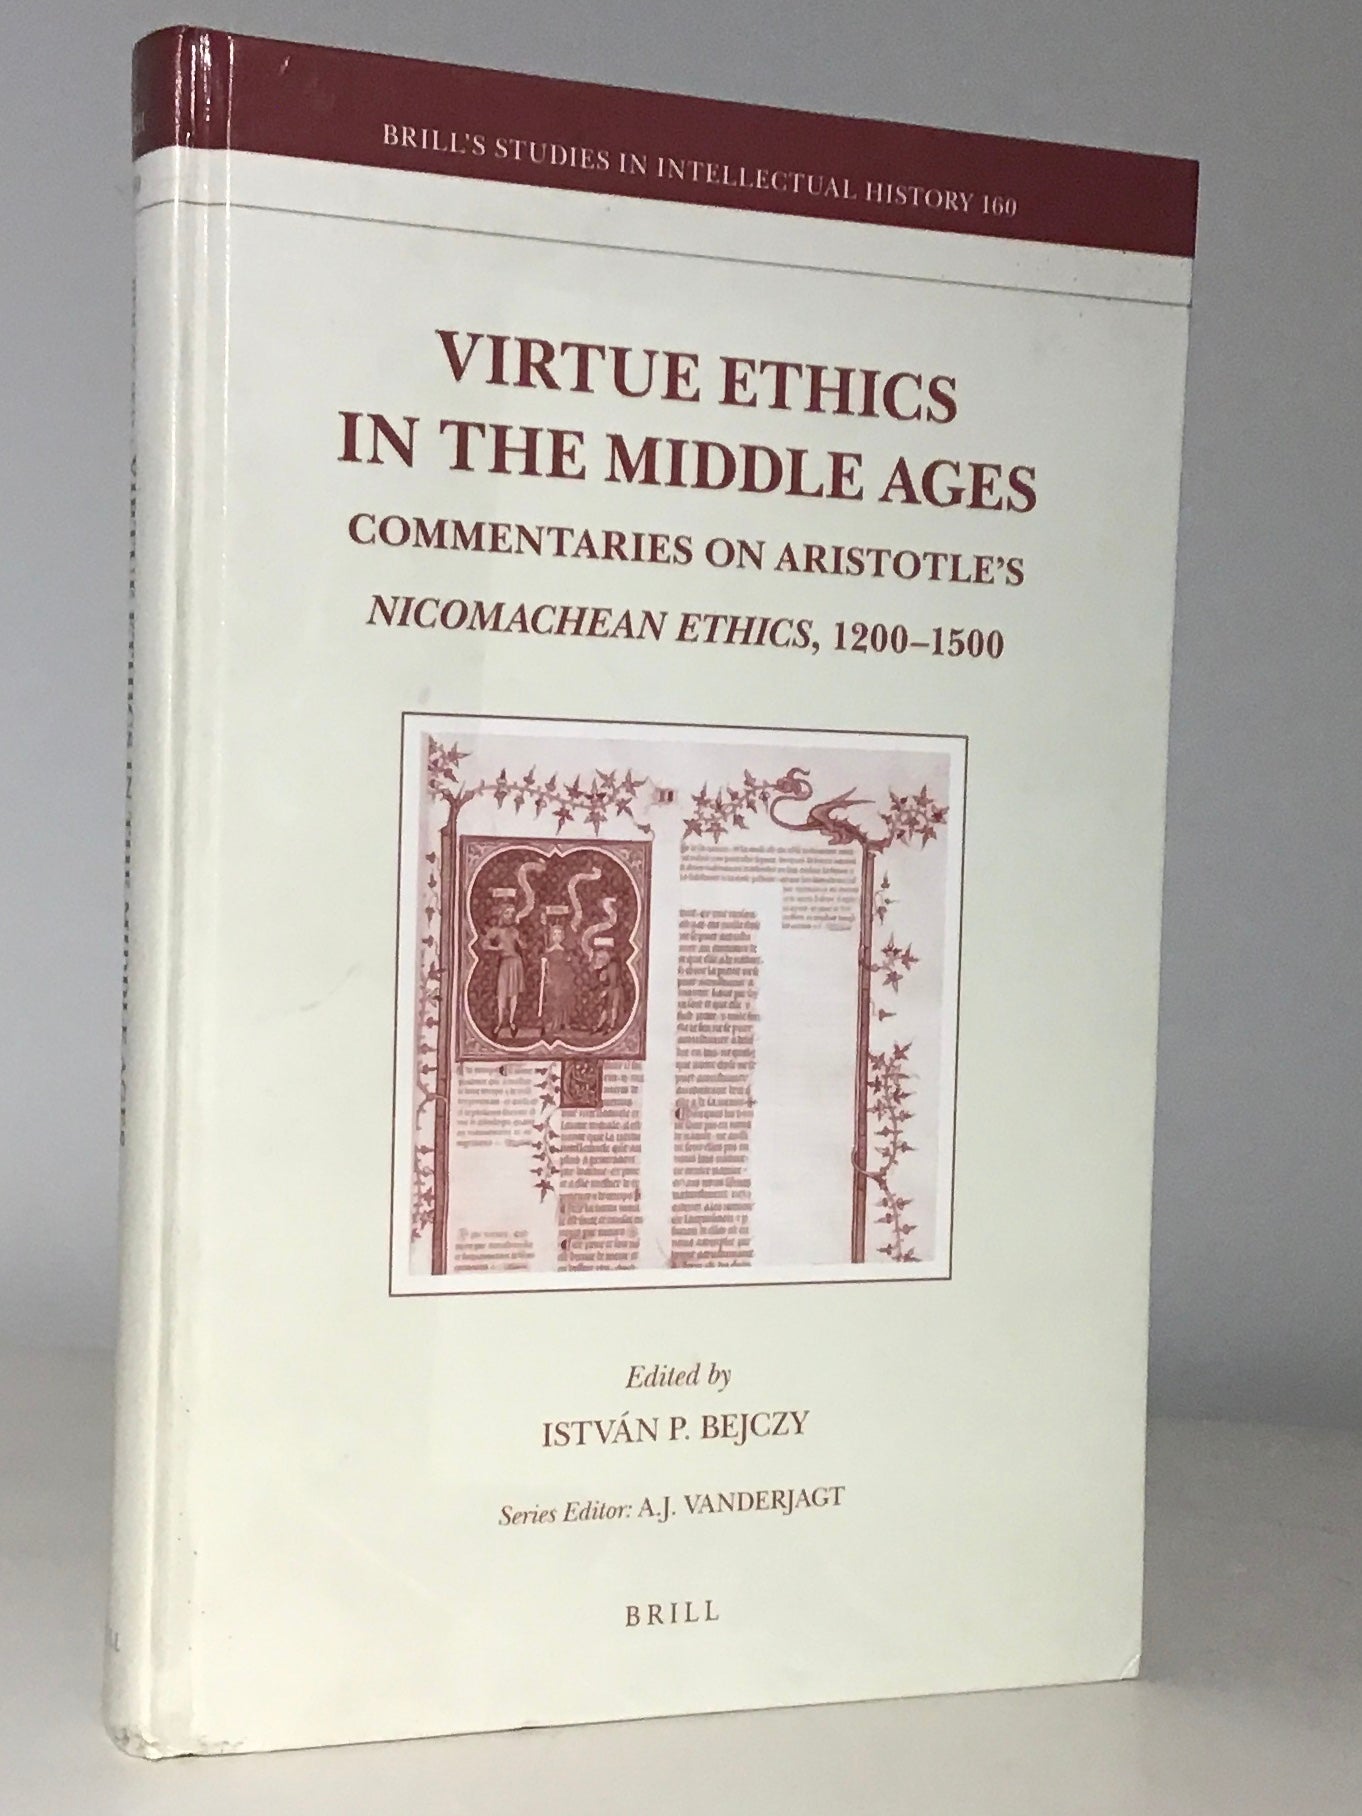 Virtue Ethics in the Middle Ages: Commentaries on Aristotle s Nicomachean Ethics, 1200-1500